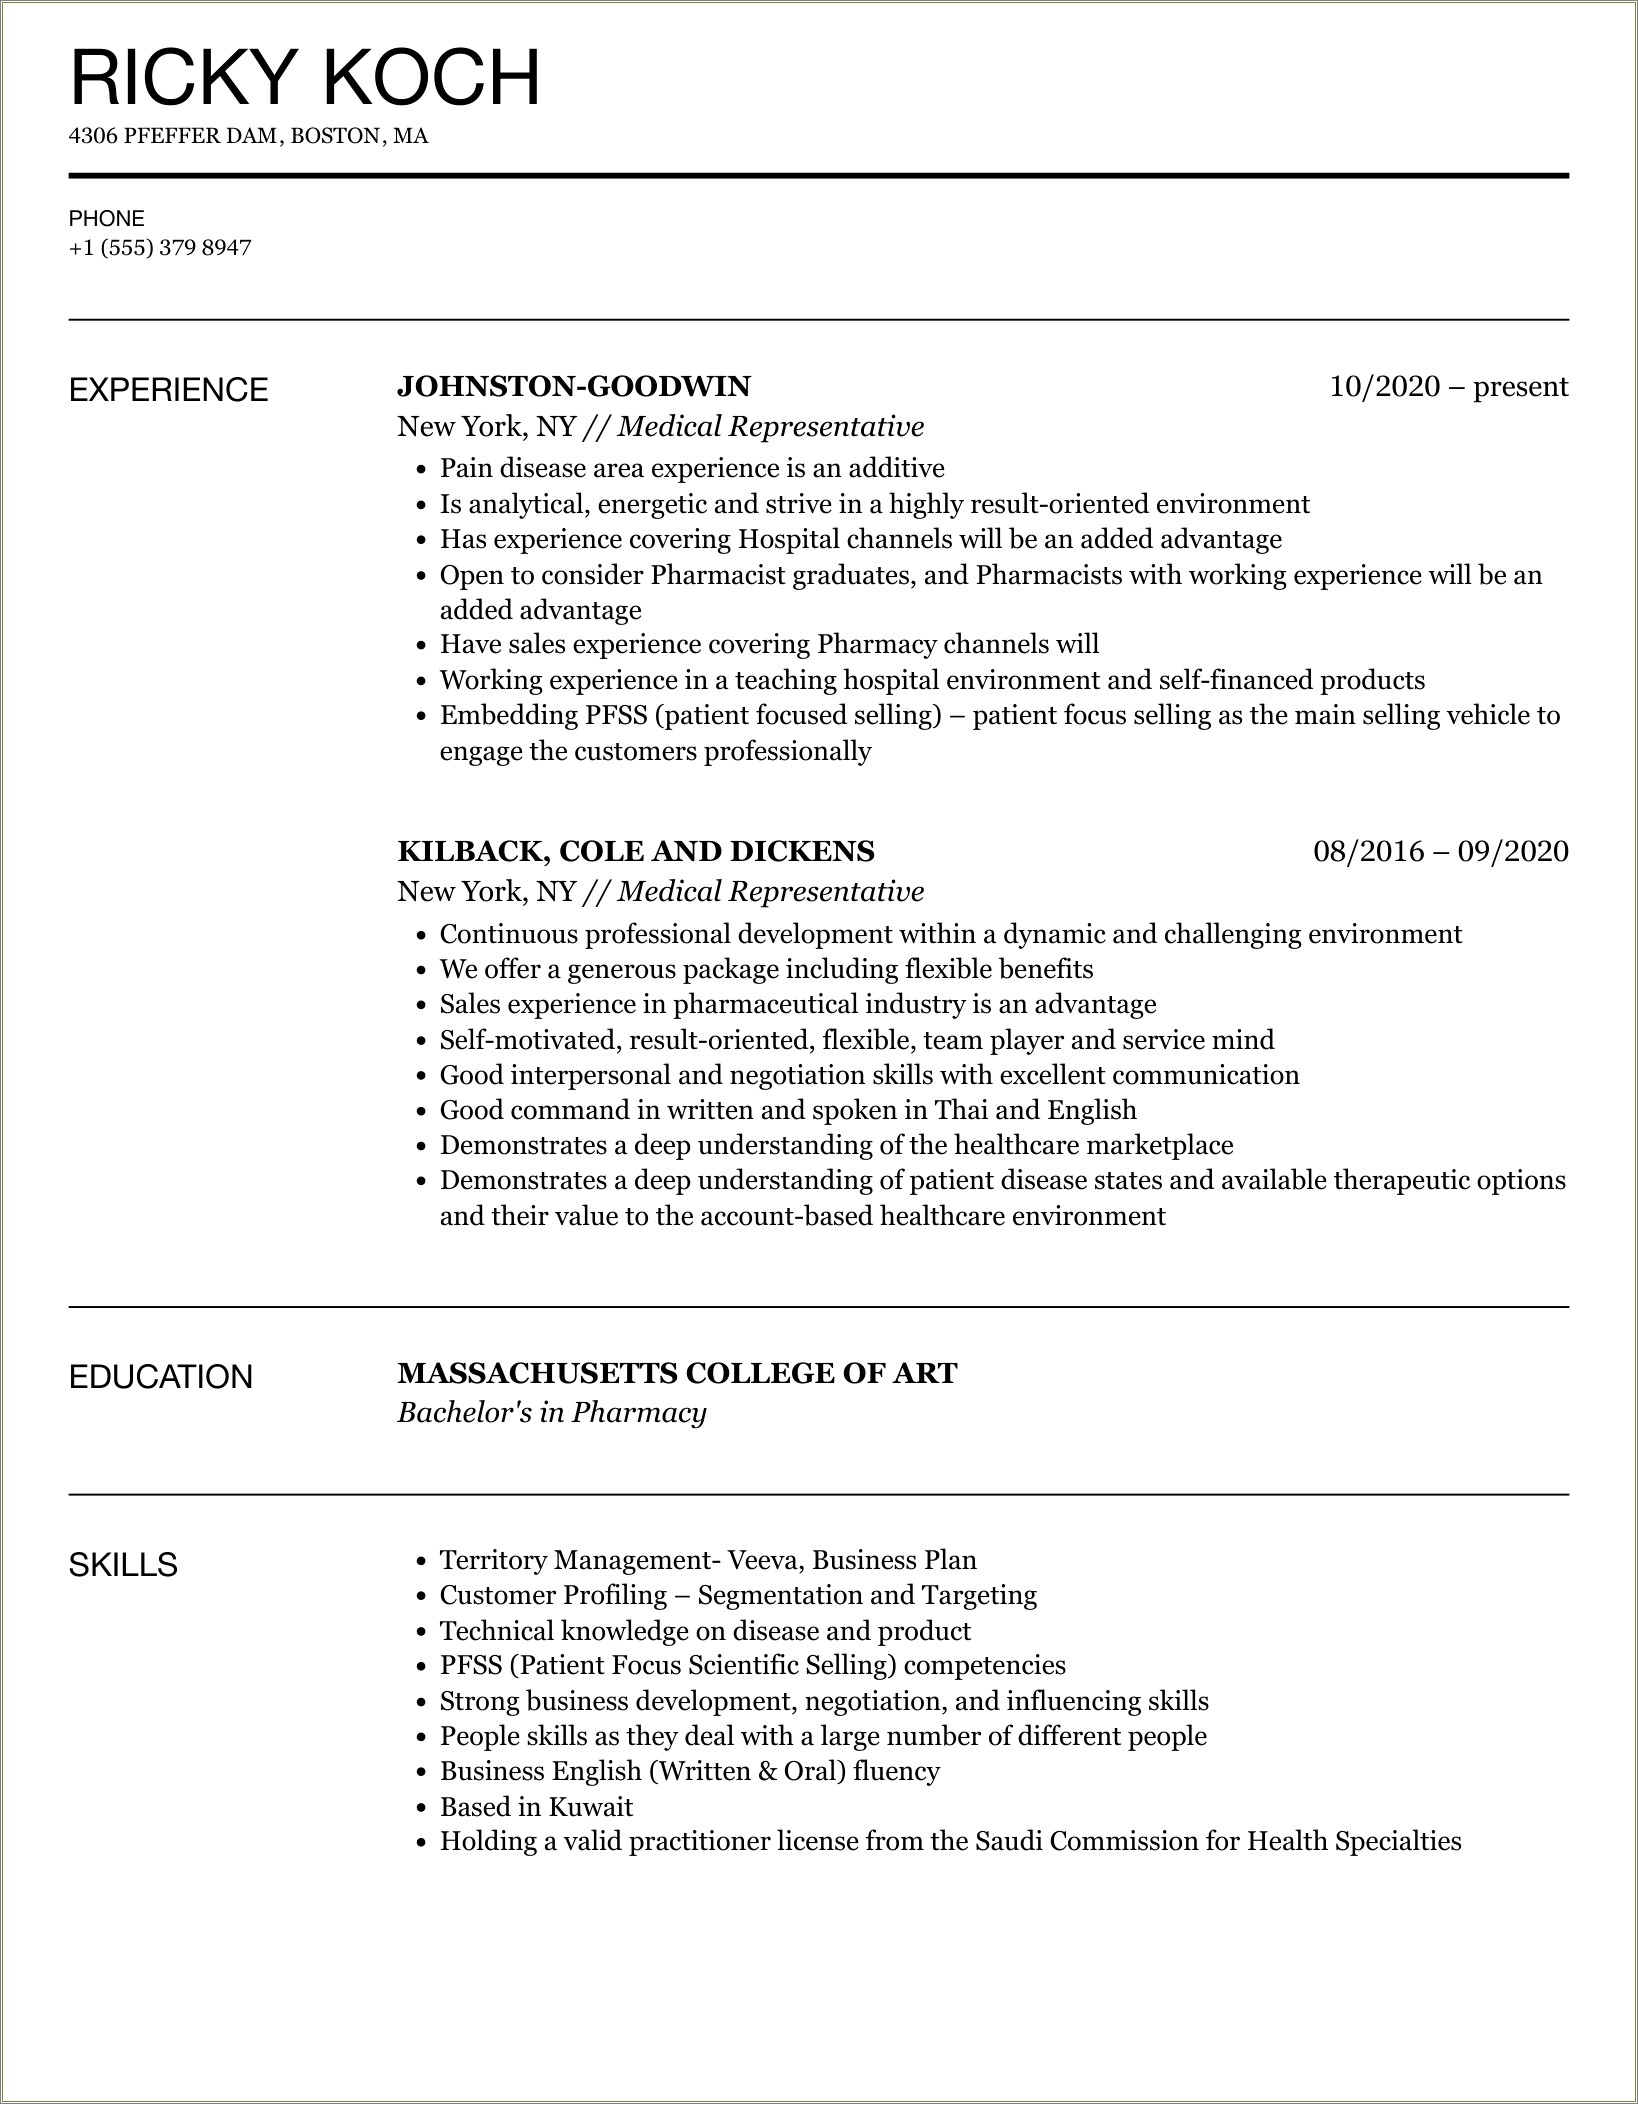 Resume For Medical Representative With Experience In India